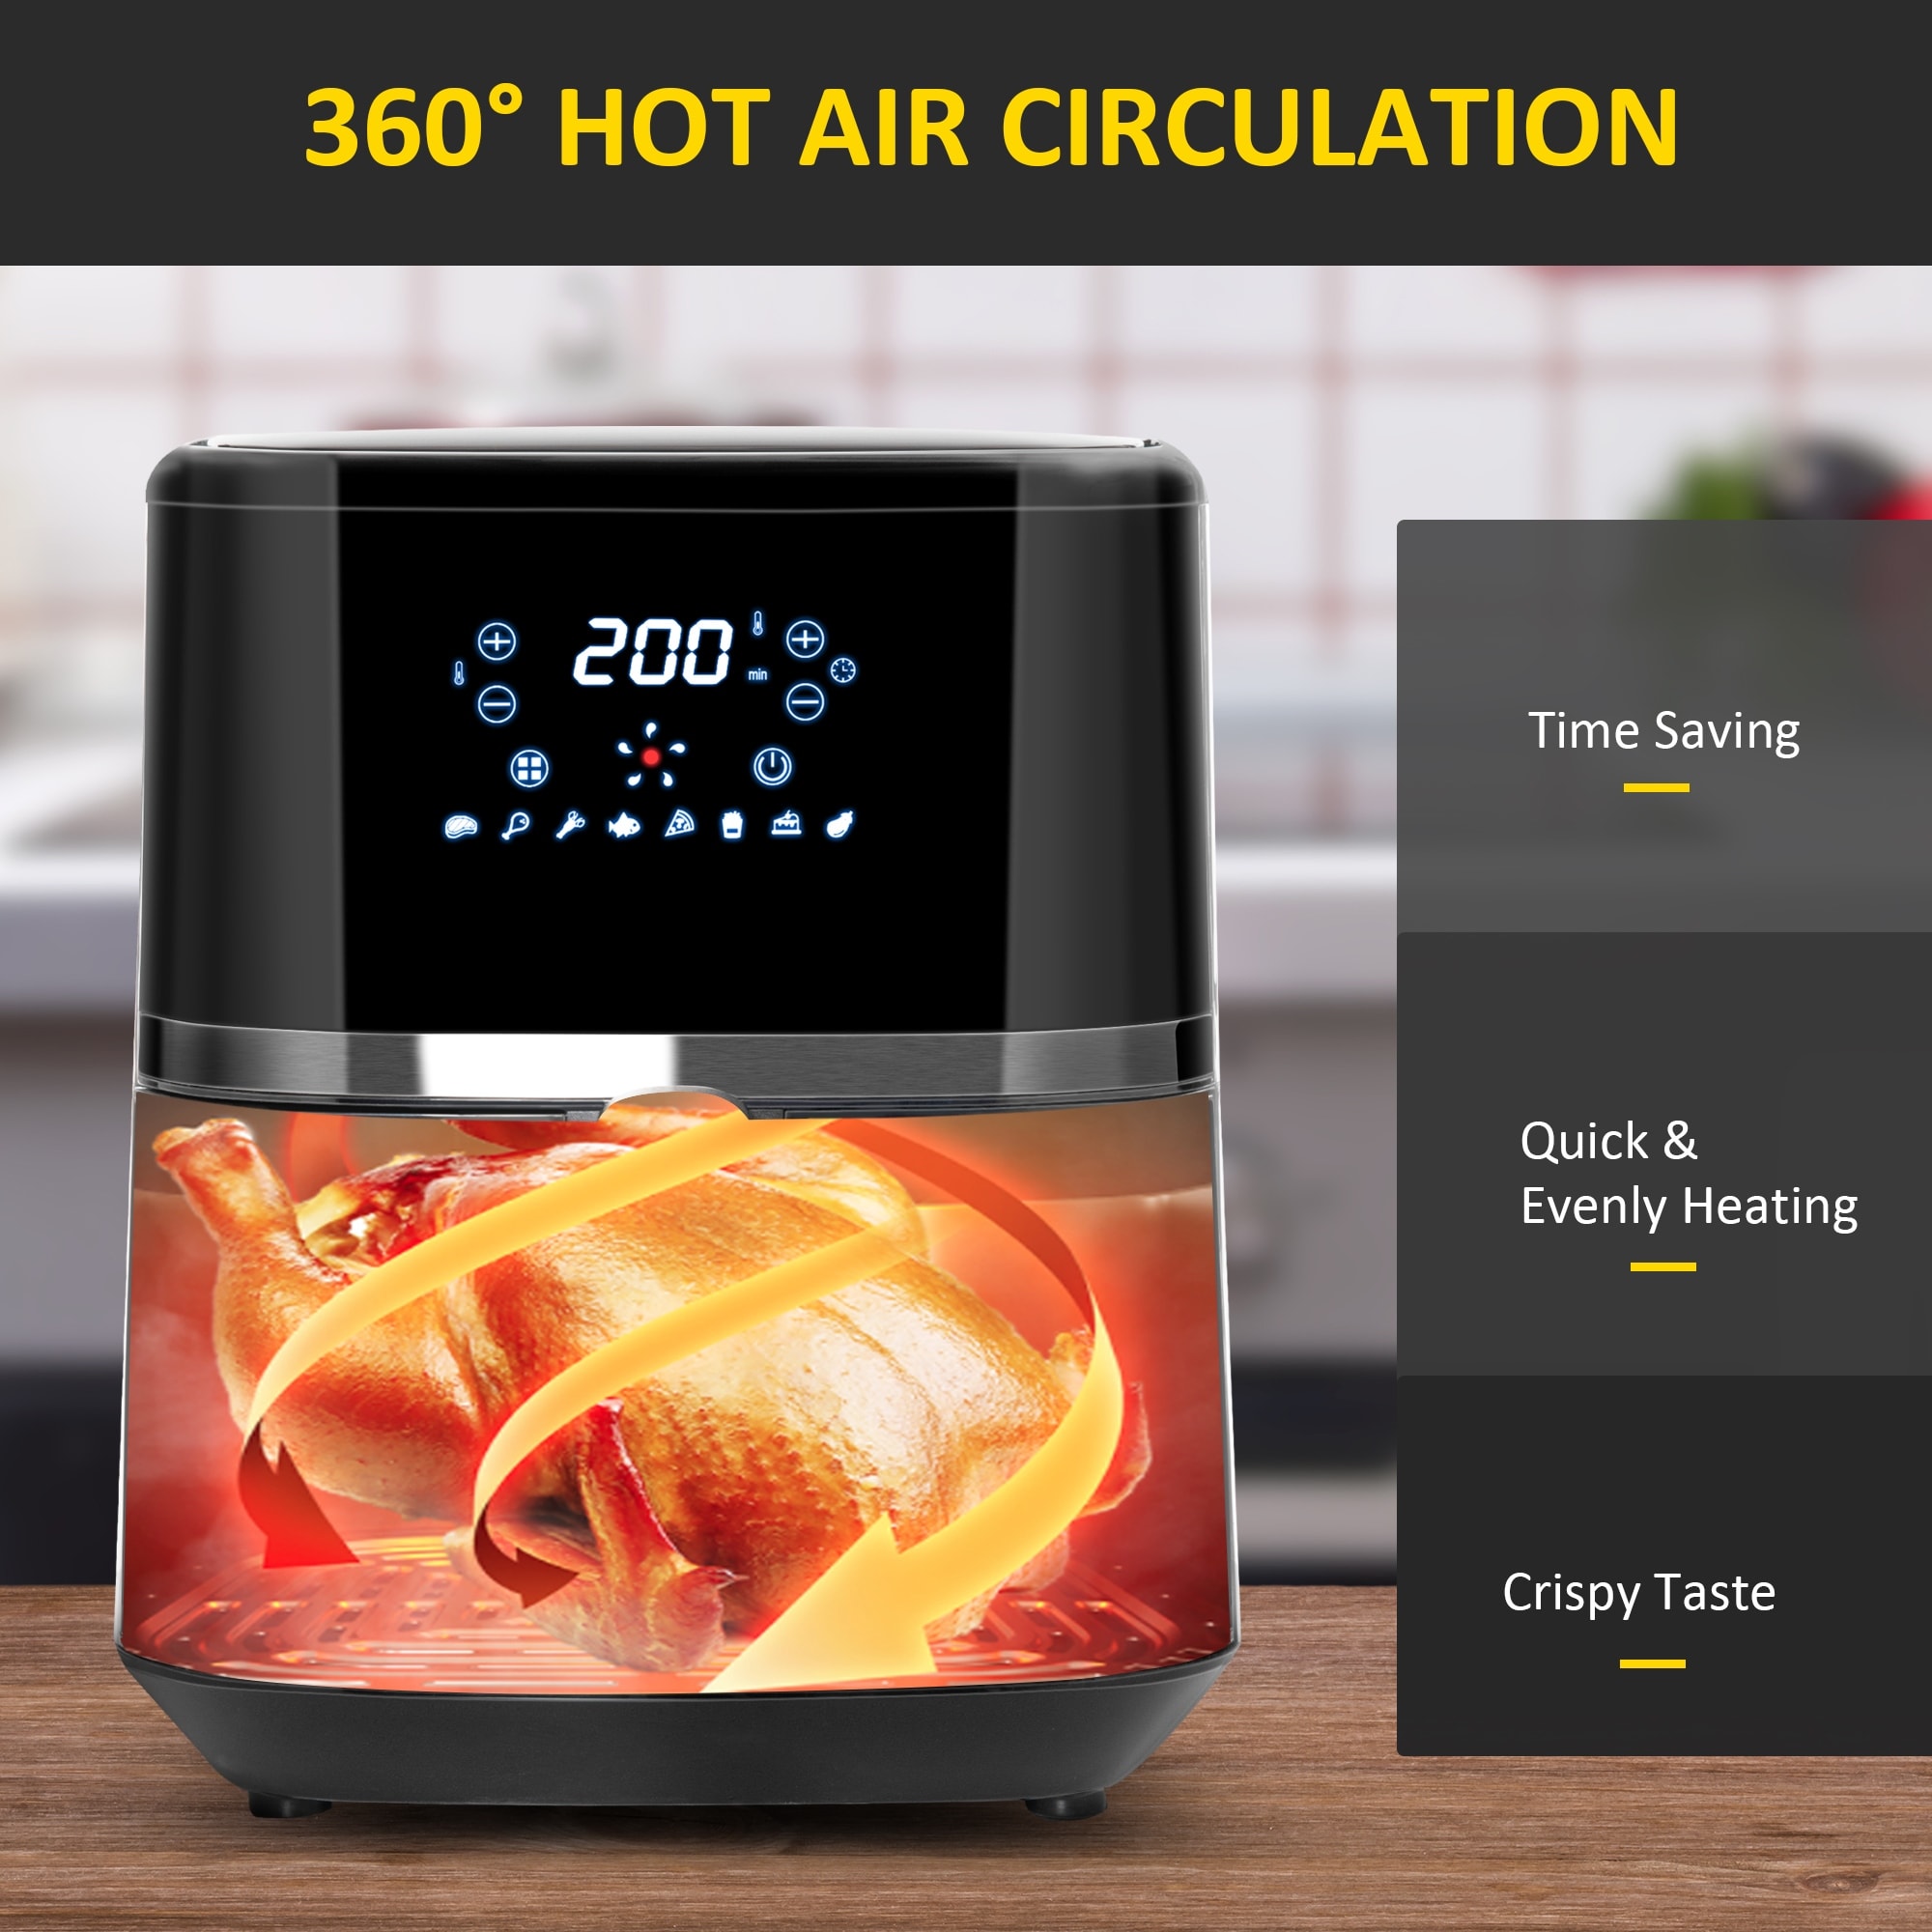 https://ak1.ostkcdn.com/images/products/is/images/direct/3df6f5d4e16a83948017e31b99c6749ac51a3f53/HOMCOM-Air-Fryers-4Qt%2C-4-in-1-Hot-Oven-with-Air-Fry%2C-Roast%2C-Broil%2C-Crisp%2C-Bake-Function%2C-Digital-Touchscreen%2C-60-Min-Timer.jpg